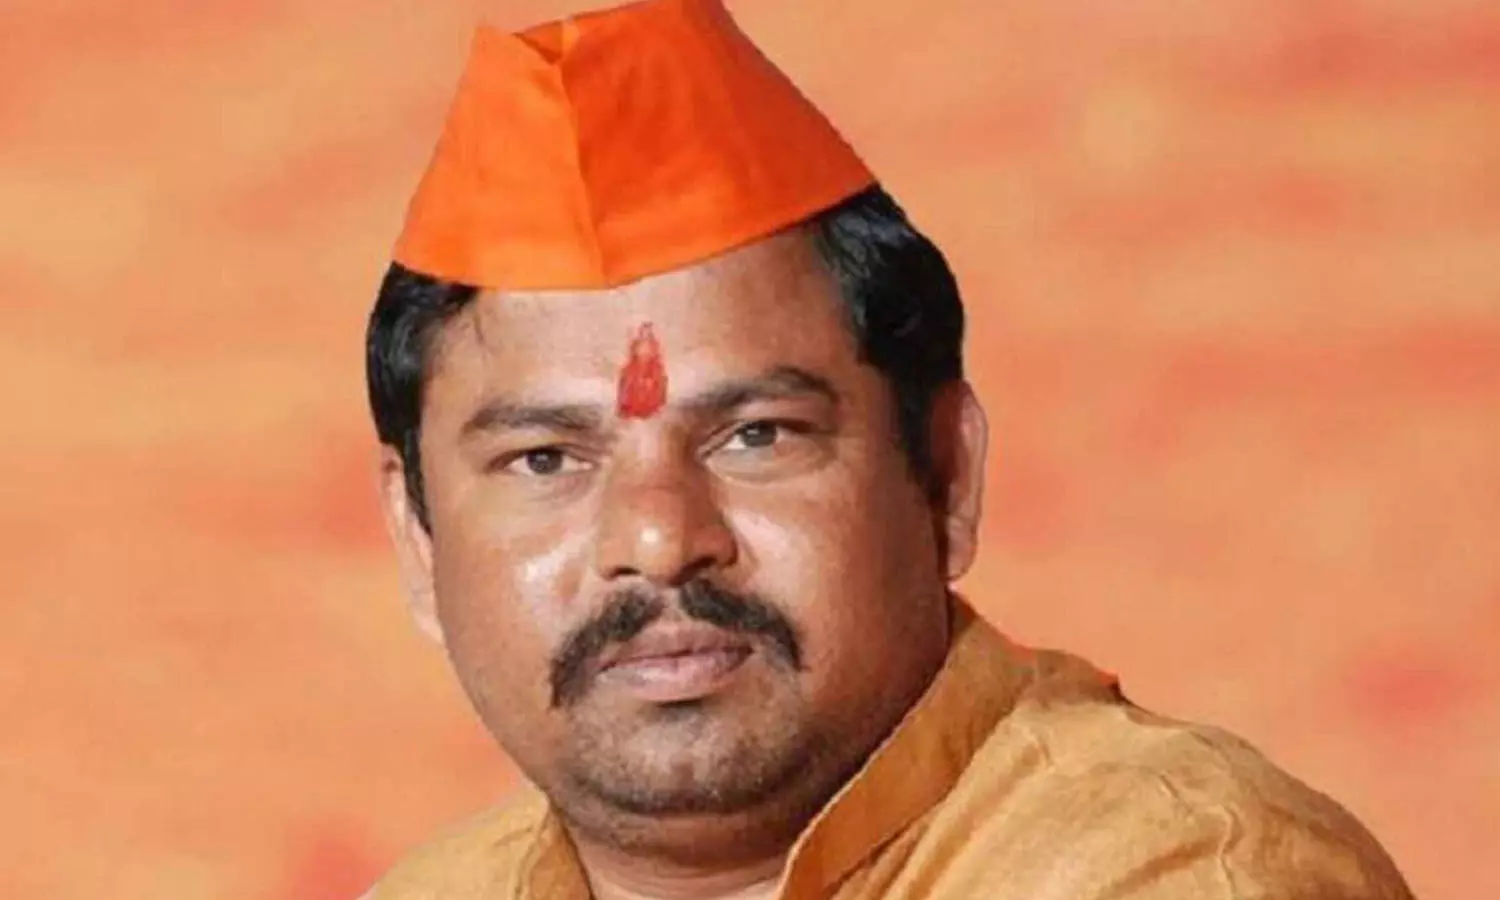 Case booked against MLA Raja Singh for violation of model code of conduct